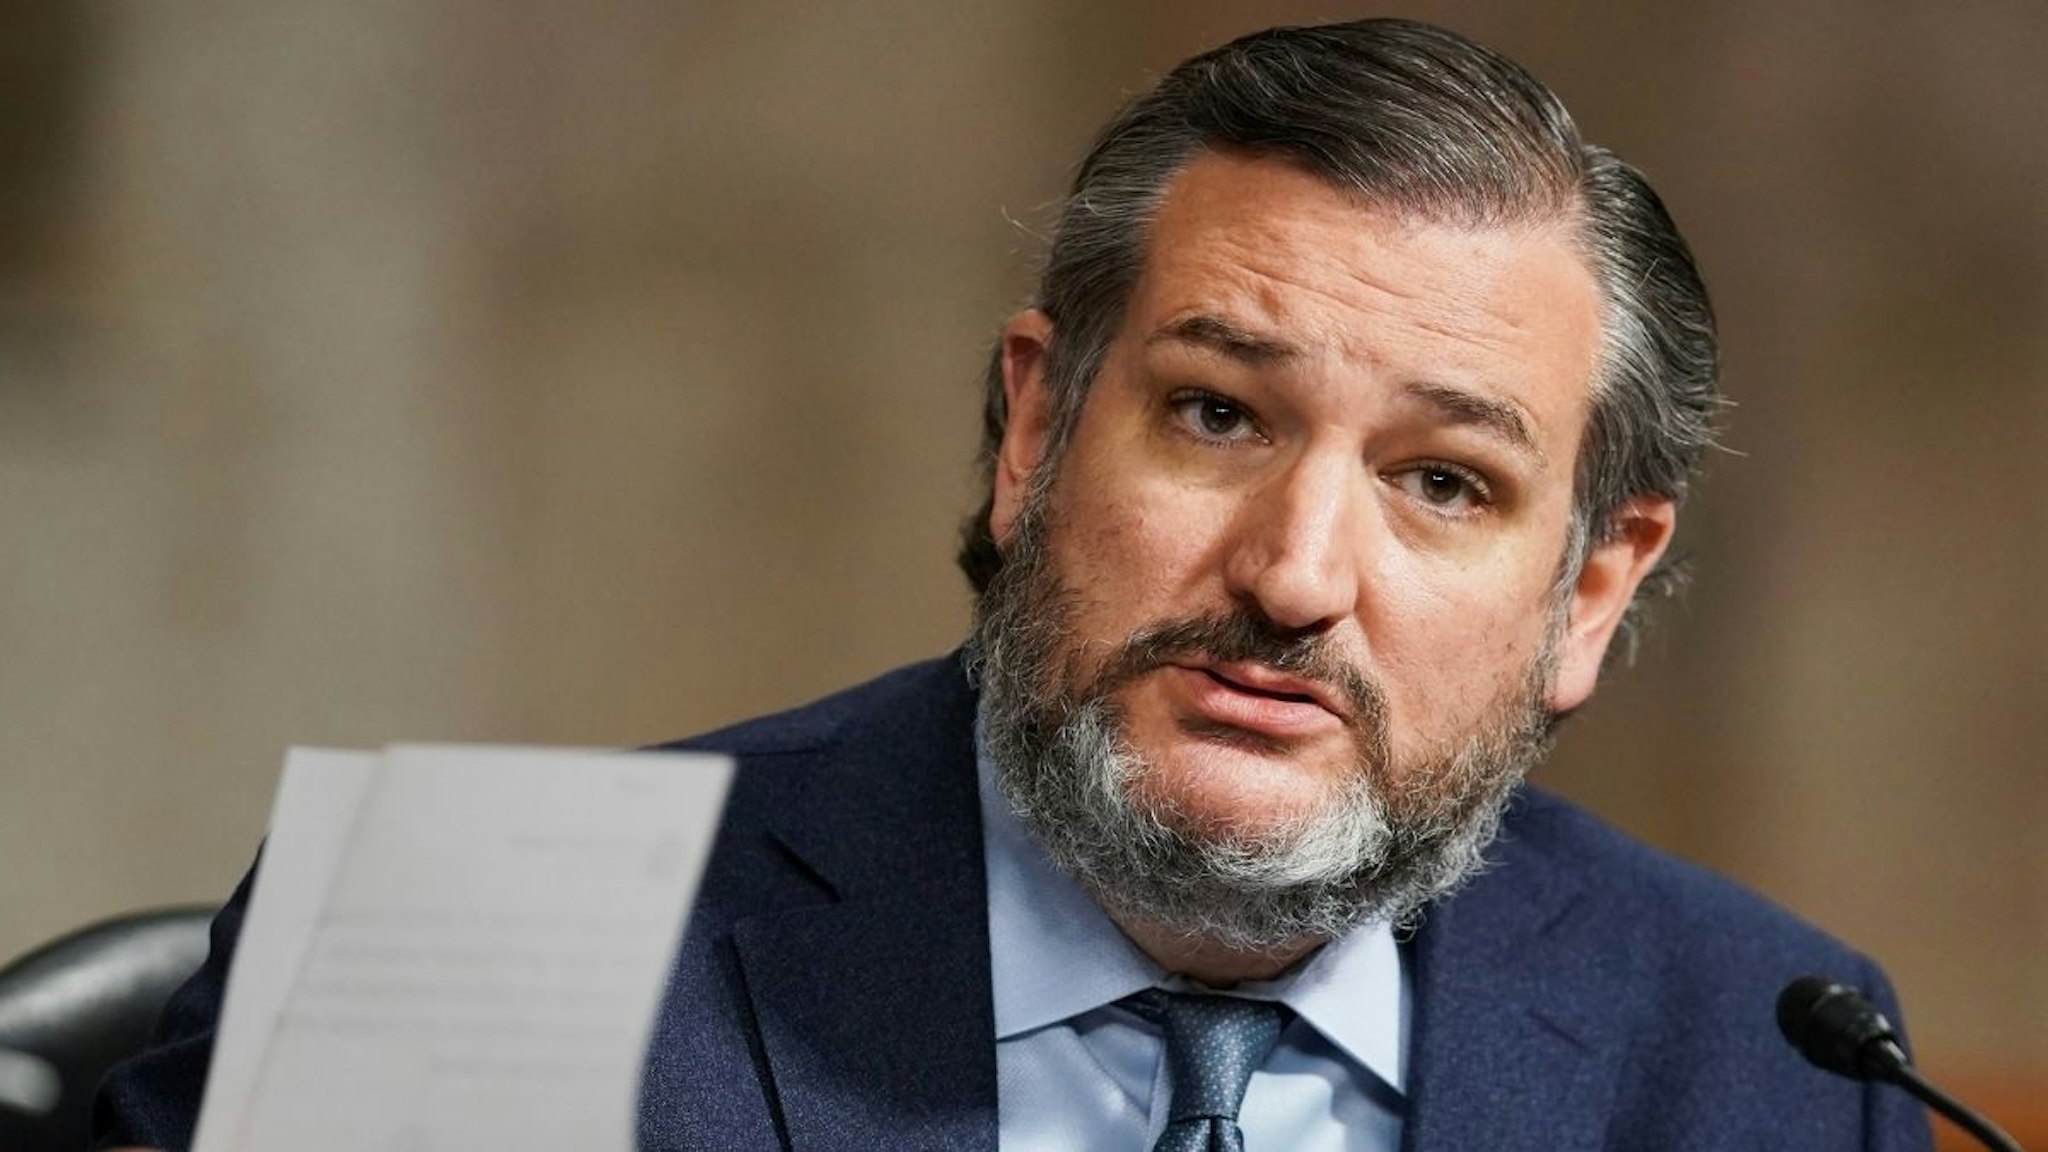 Sen. Ted Cruz (R-TX) holds up a letter from Washington, D.C., Mayor Muriel Boswer (D) during a Senate Homeland Security and Governmental Affairs & Senate Rules and Administration joint hearing to discuss the January 6th attack on the U.S. Capitol on March 3, 2021 in Washington, DC.